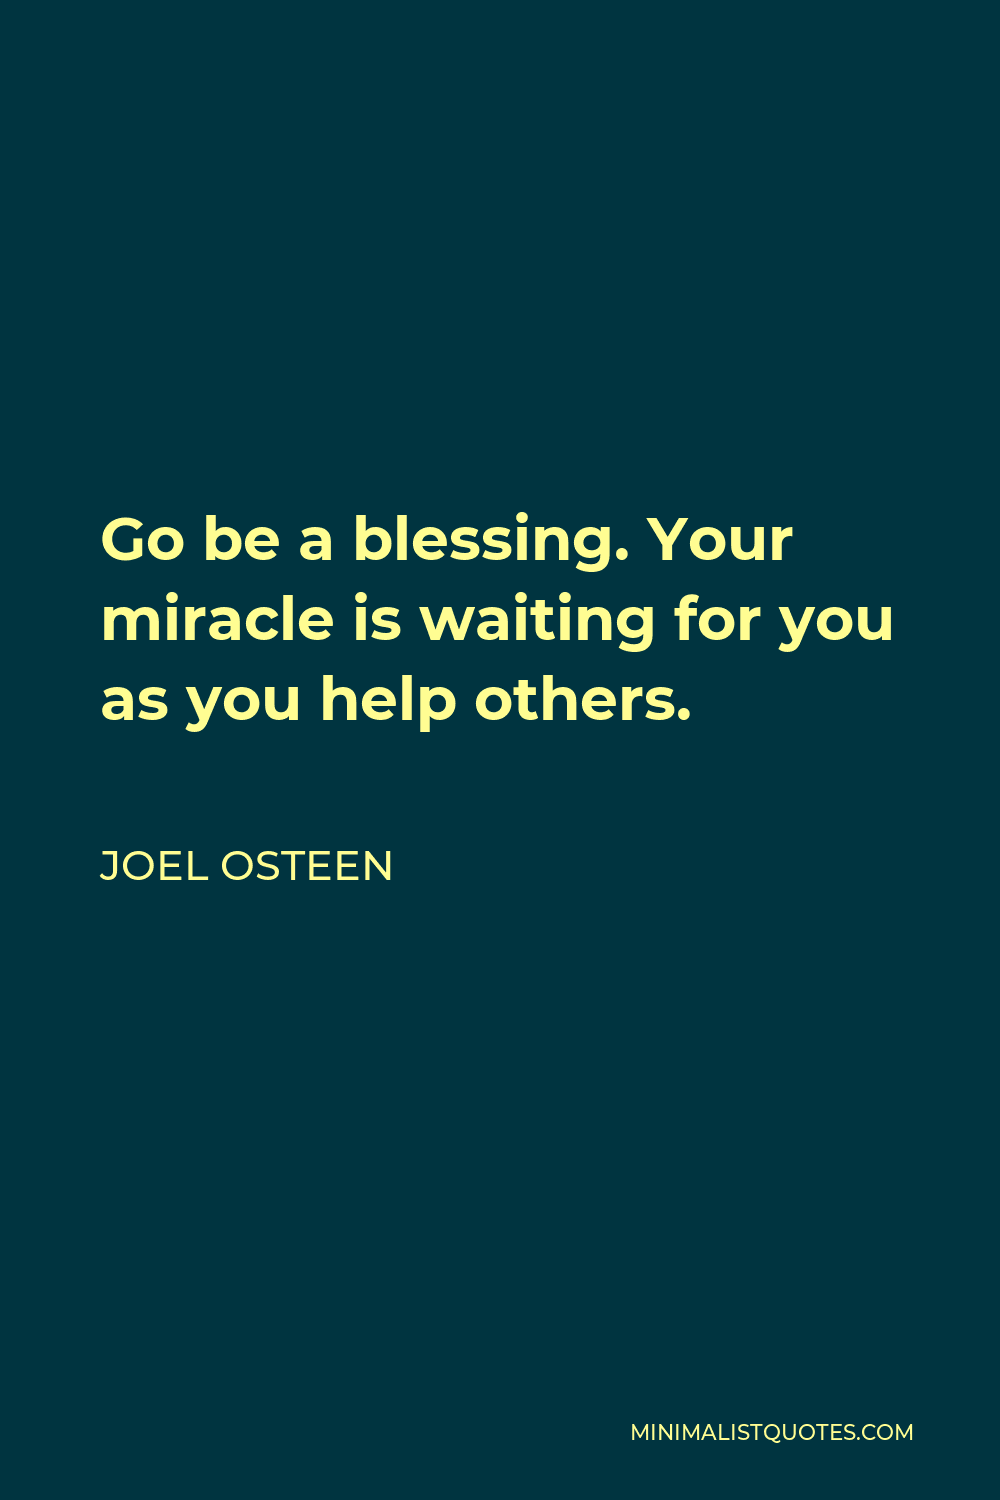 Joel Osteen Quote - Go be a blessing. Your miracle is waiting for you as you help others.